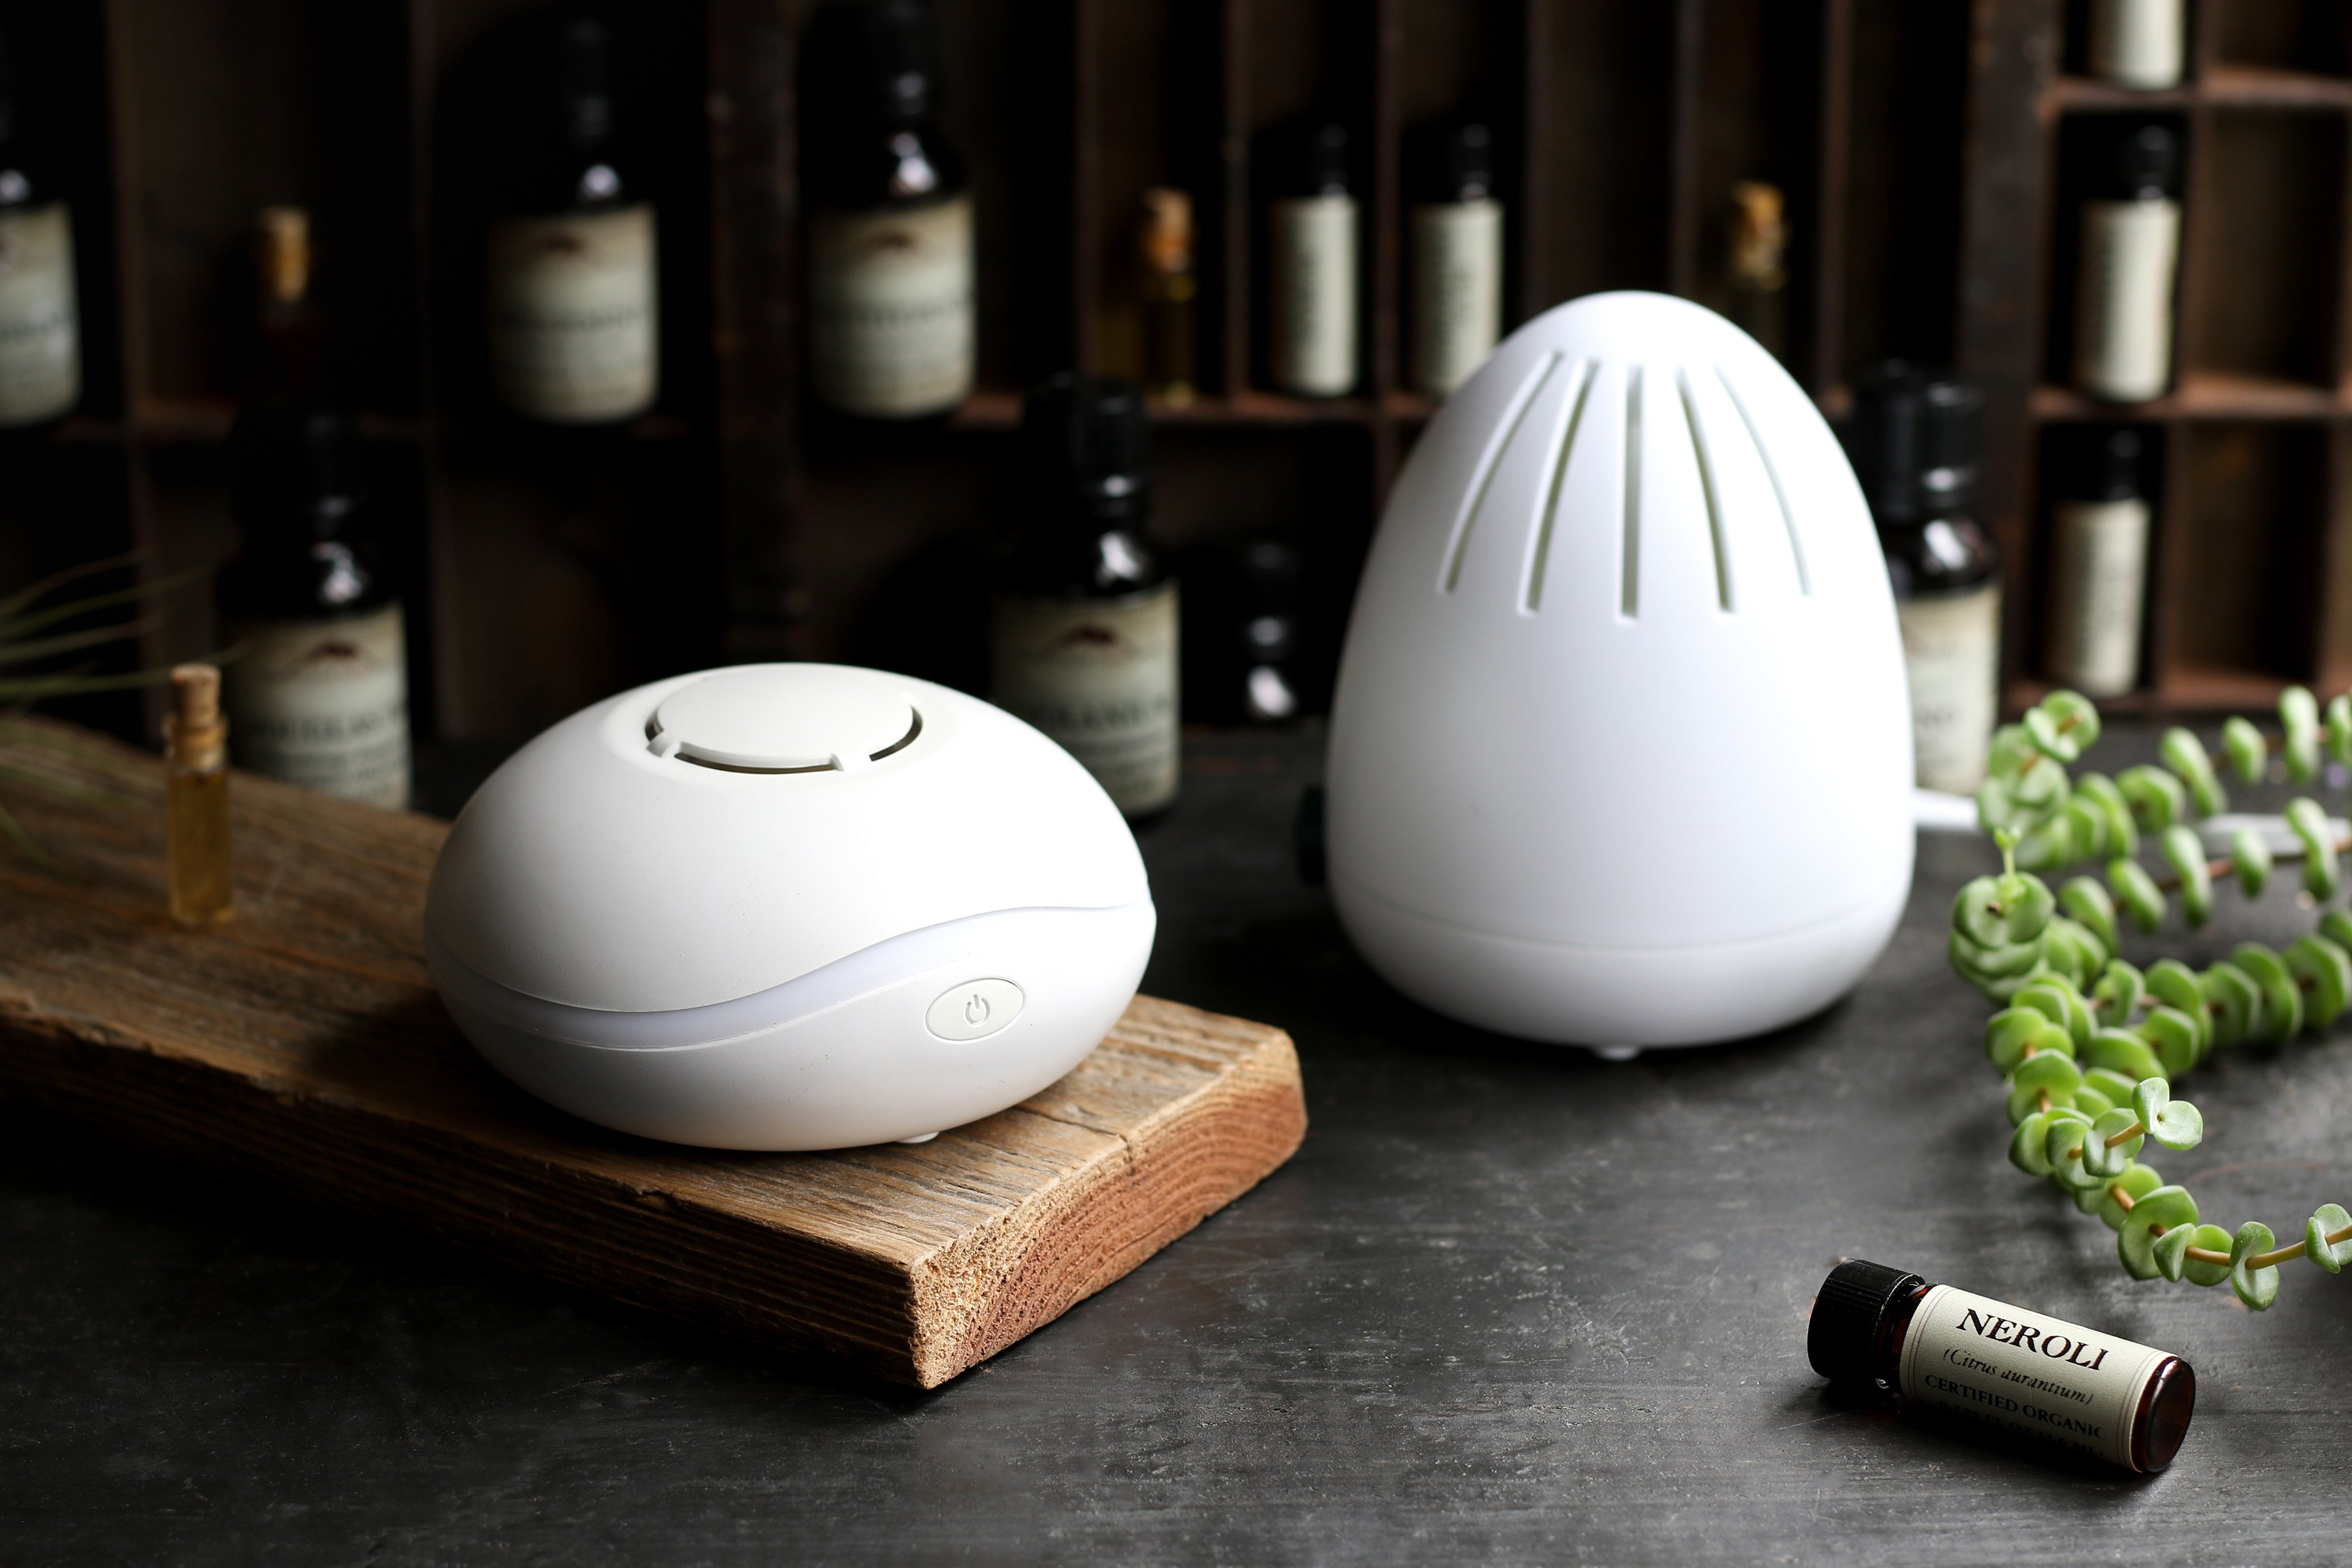 Electric essential oil diffusers which use a pad to diffuse oils into a small space. Arranged with an essential oil display, and featuring neroli essential oil.